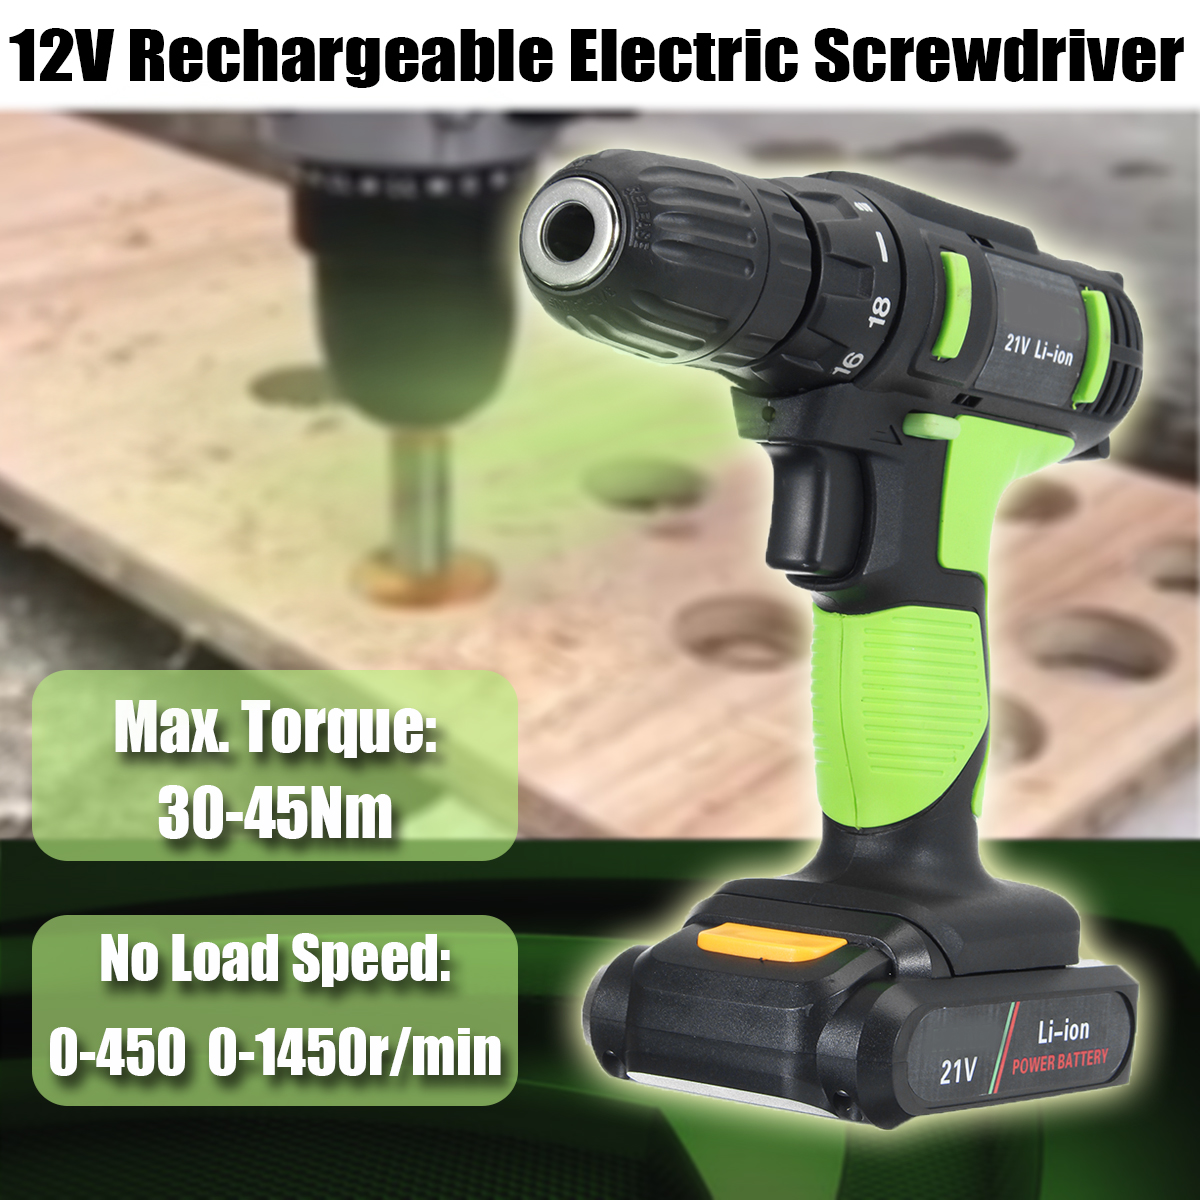 21V-Li-ion-Electric-Screwdriver-Rechargeable-Electric-Charging-Power-Drill-Two-Speed-30-45Nm-1256491-2